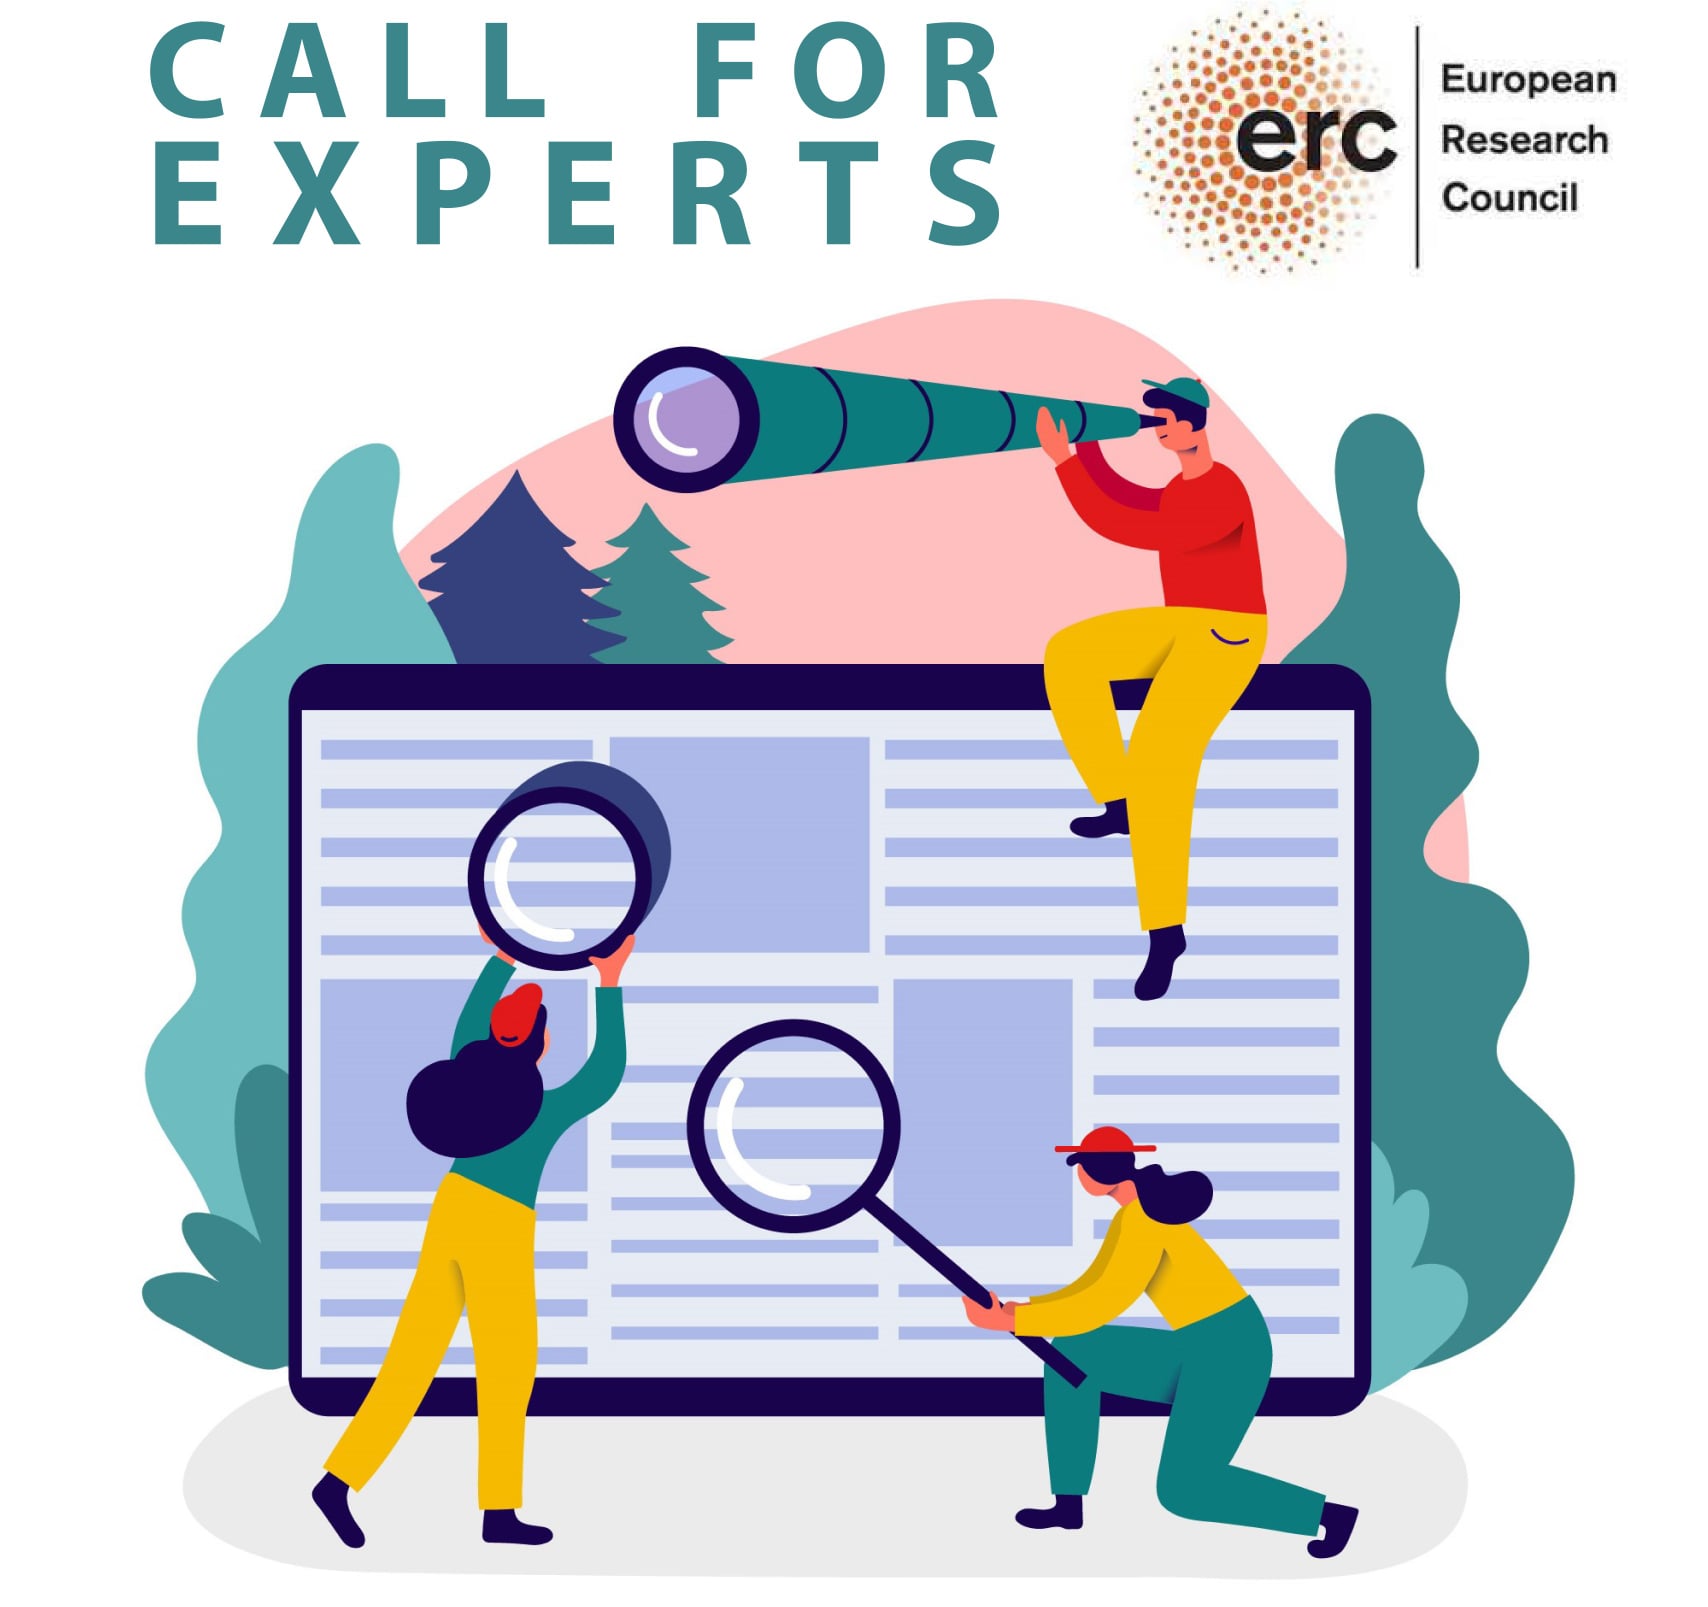 European Research Council launches call for experts to evaluate projects